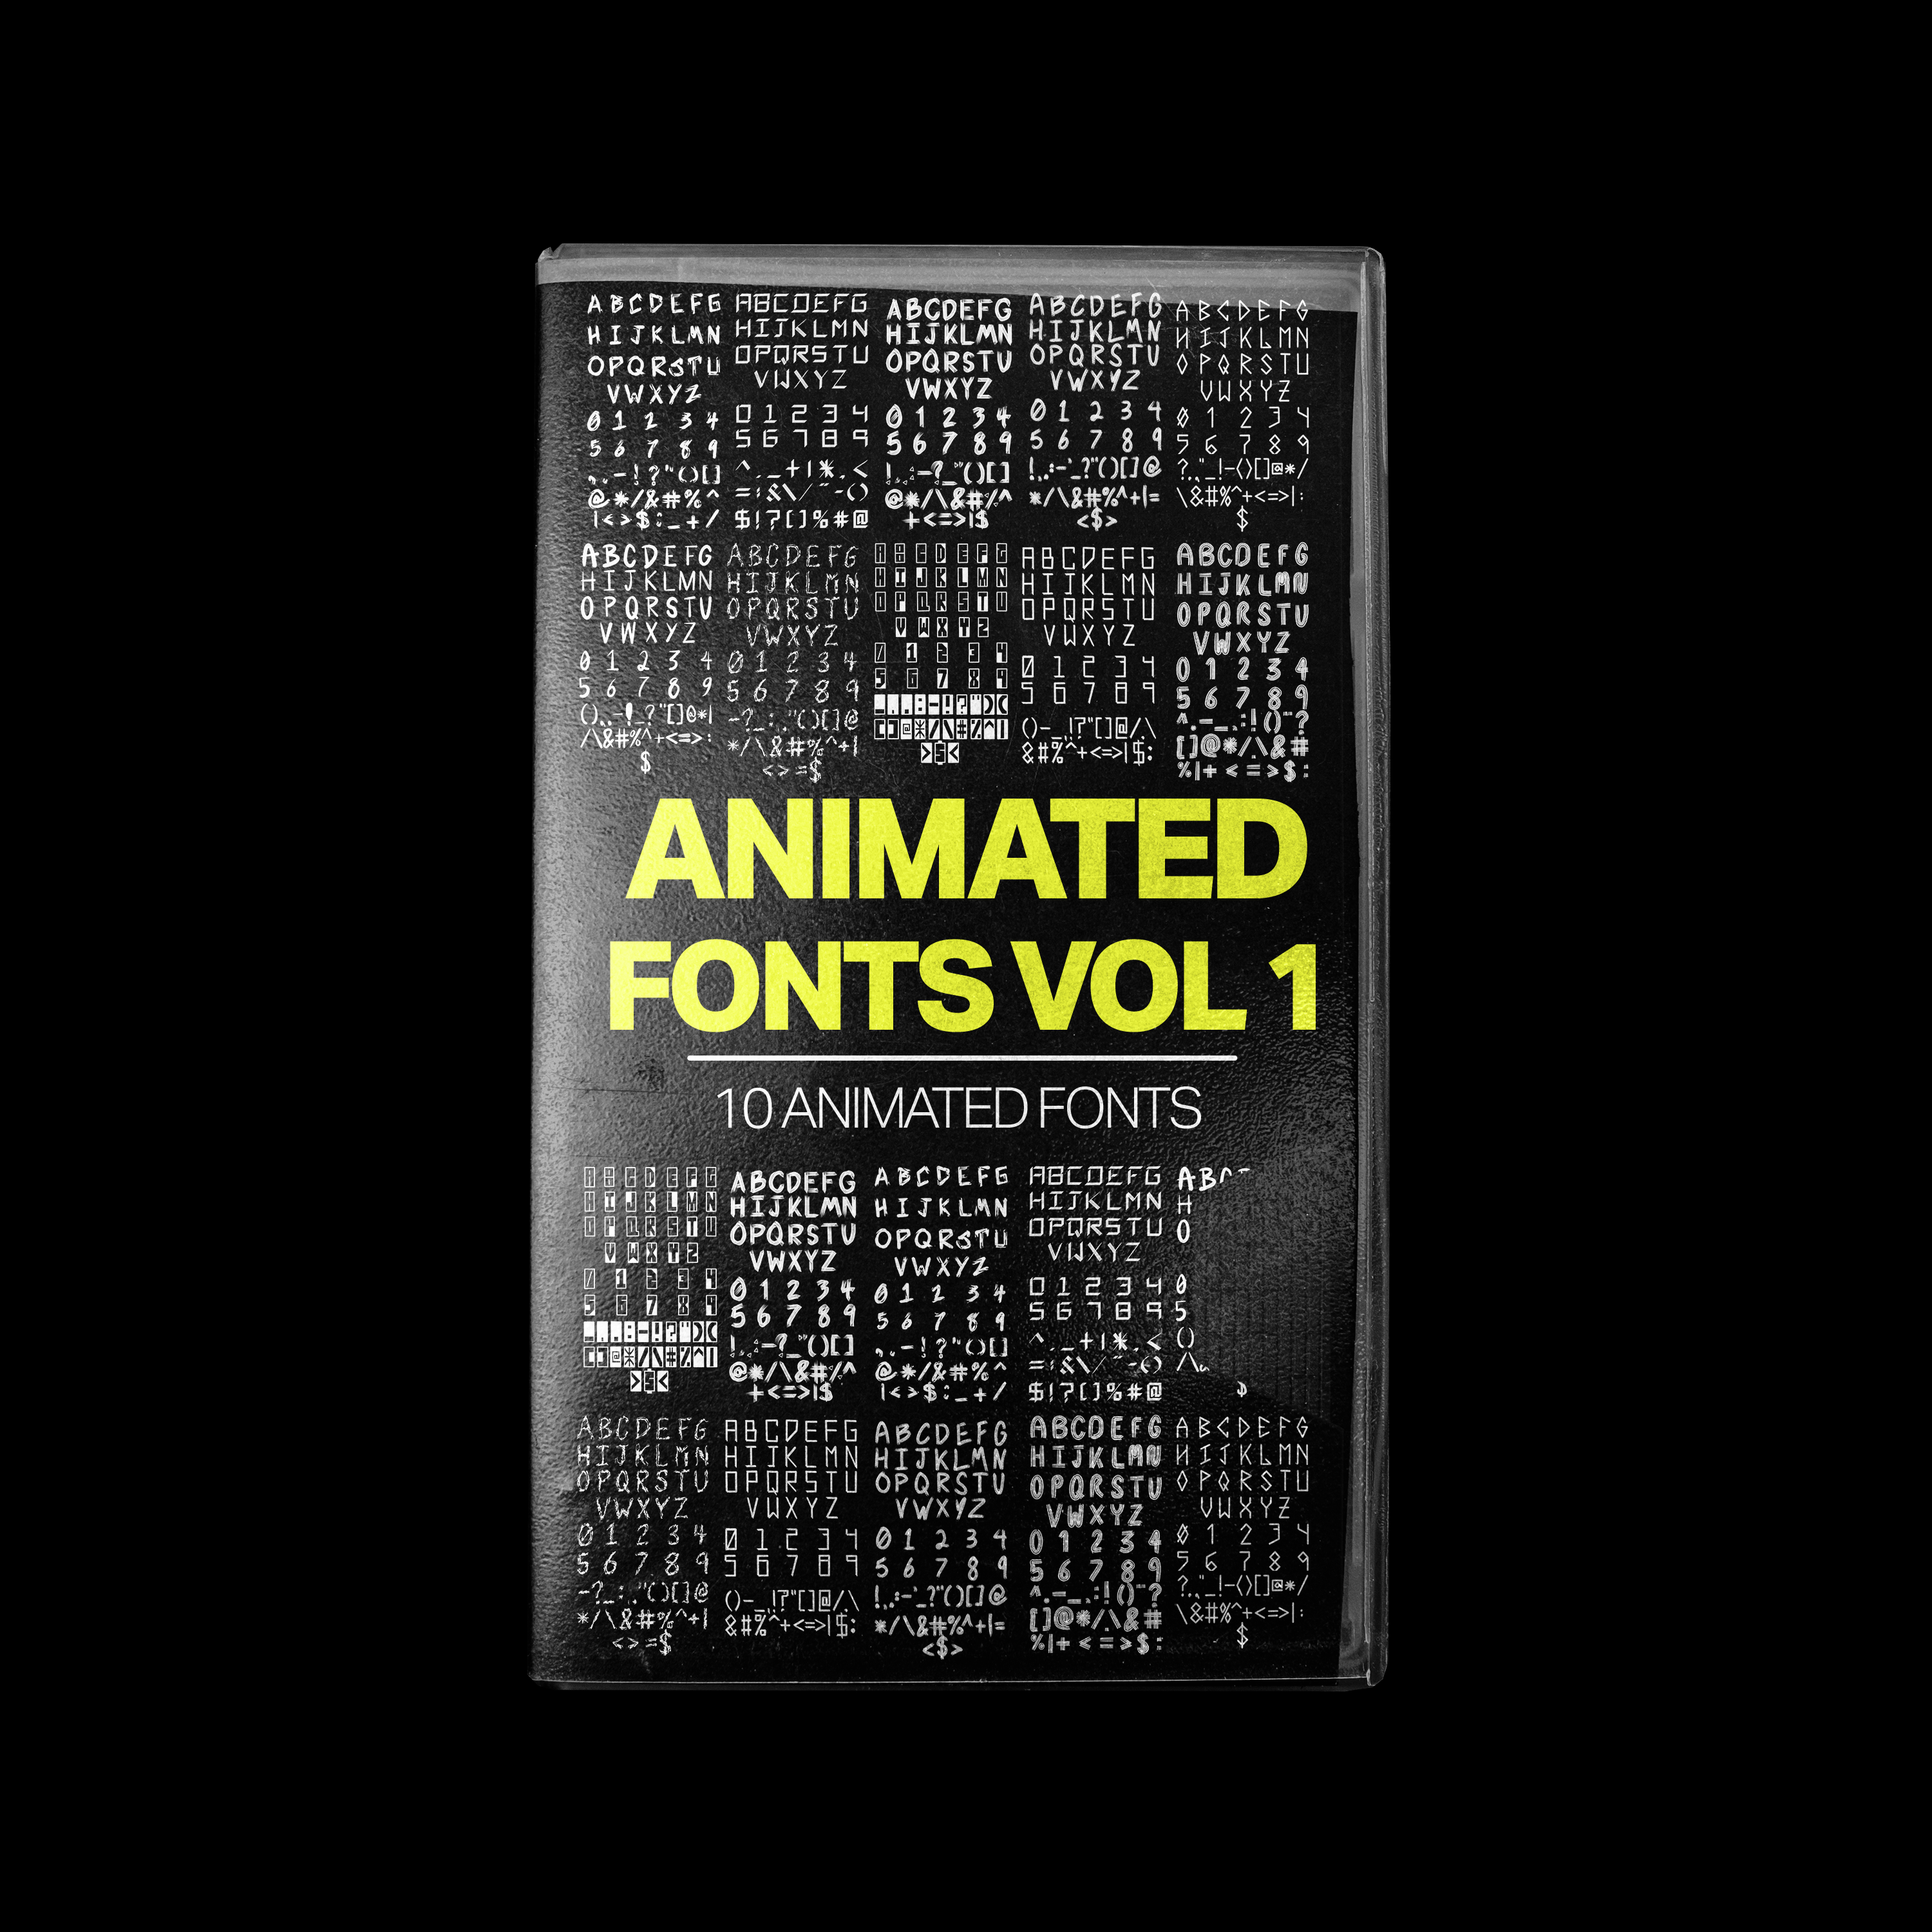 ANIMATED FONTS VOL. 1